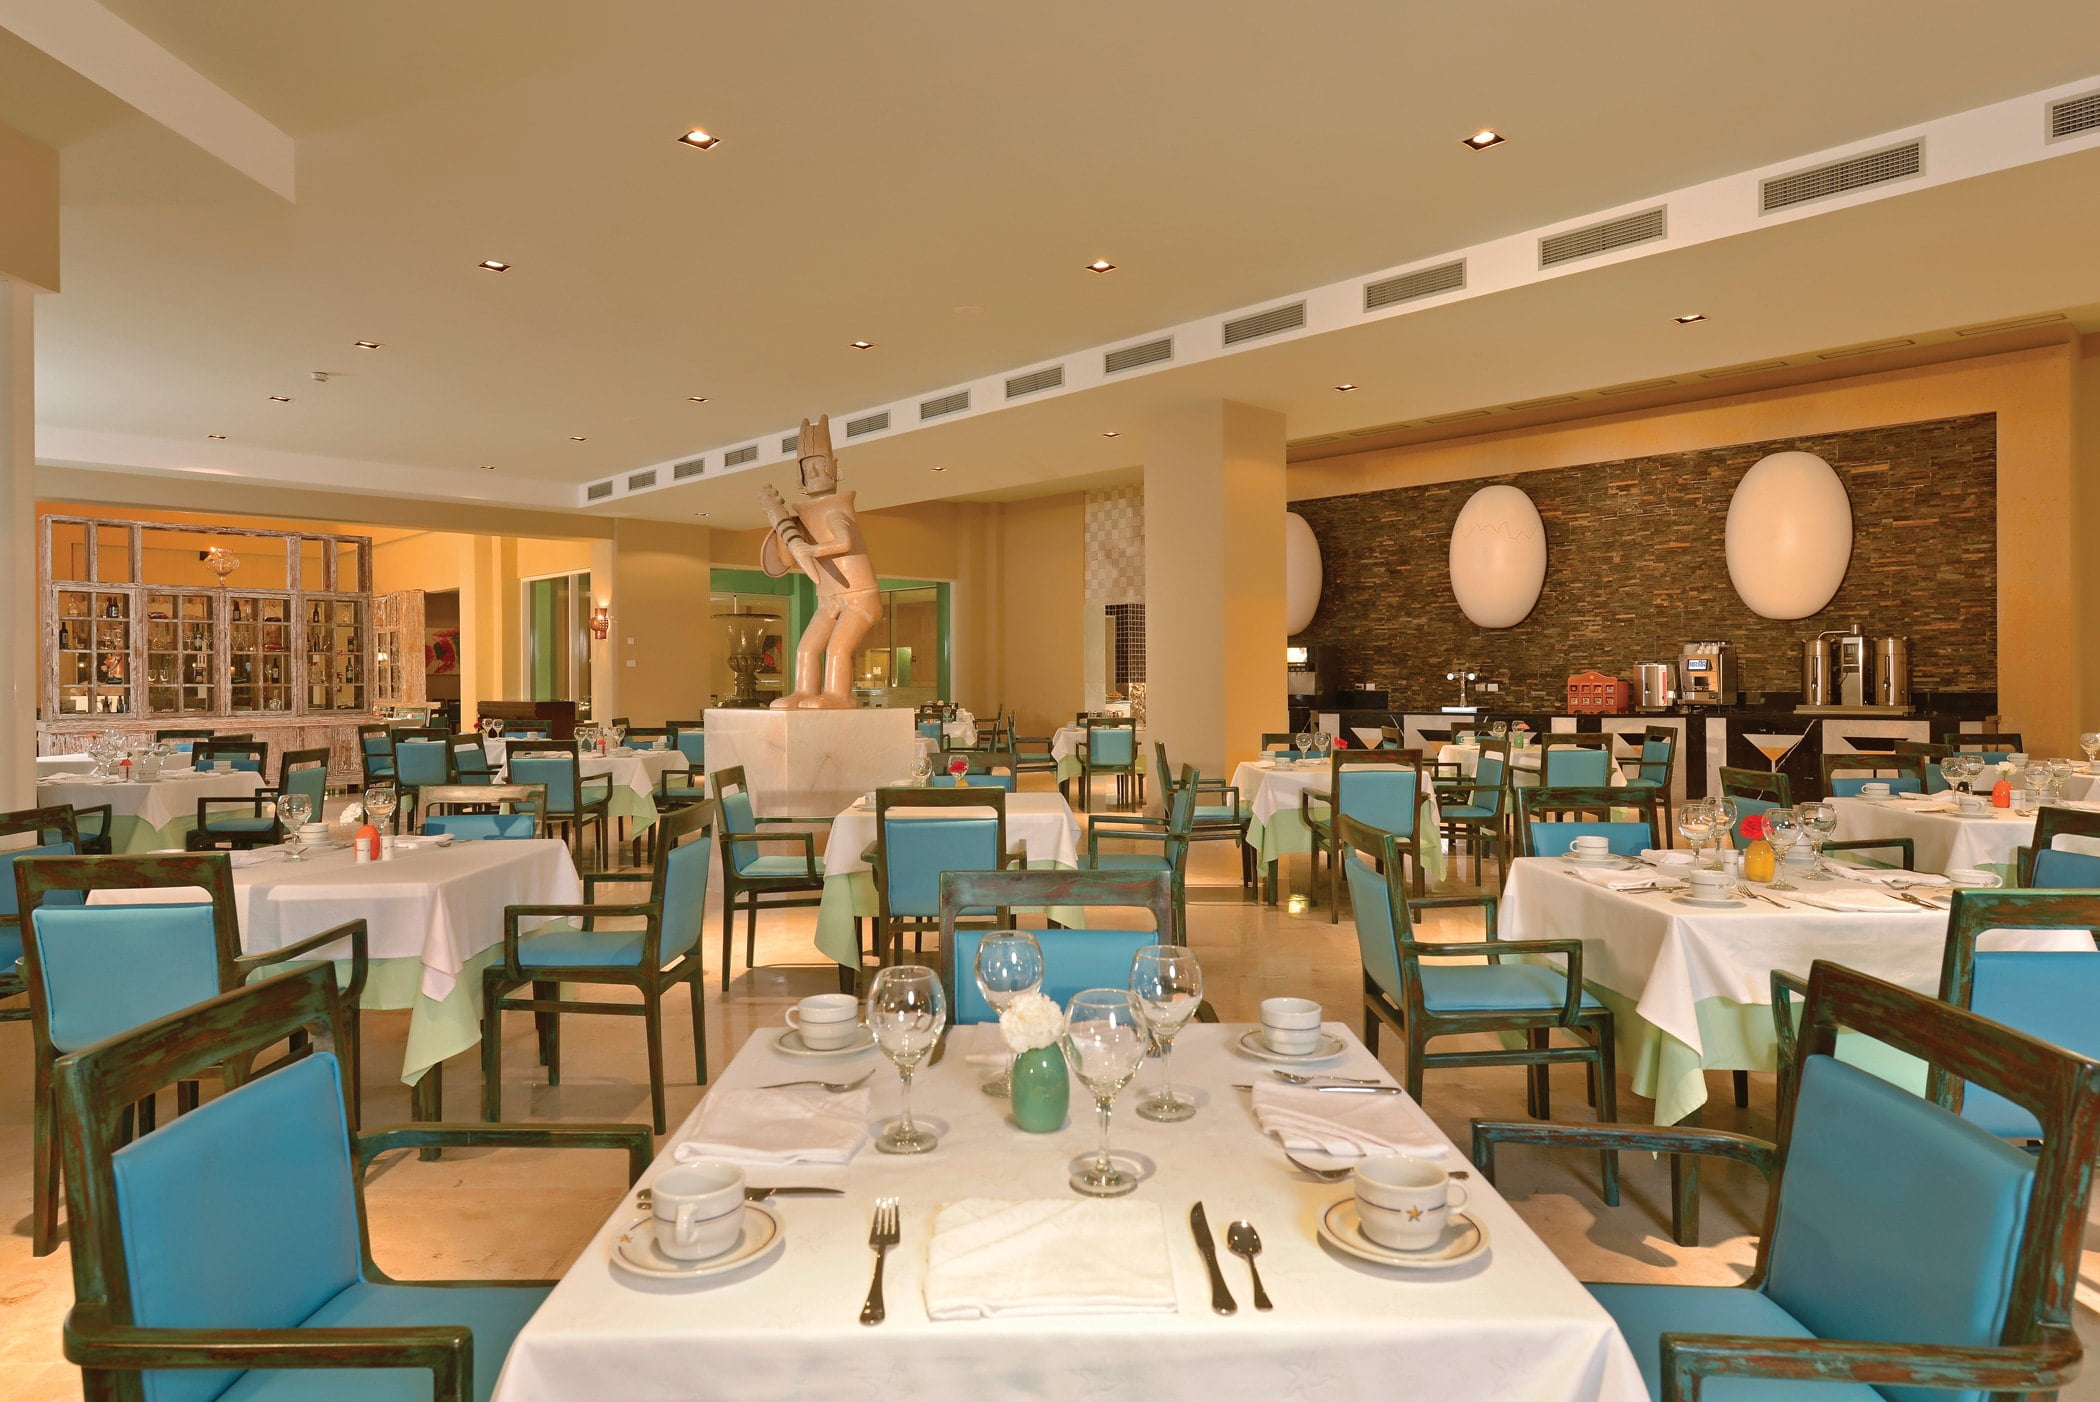 main buffet restaurant in the evening with a blue leather chairs white table linens and statue